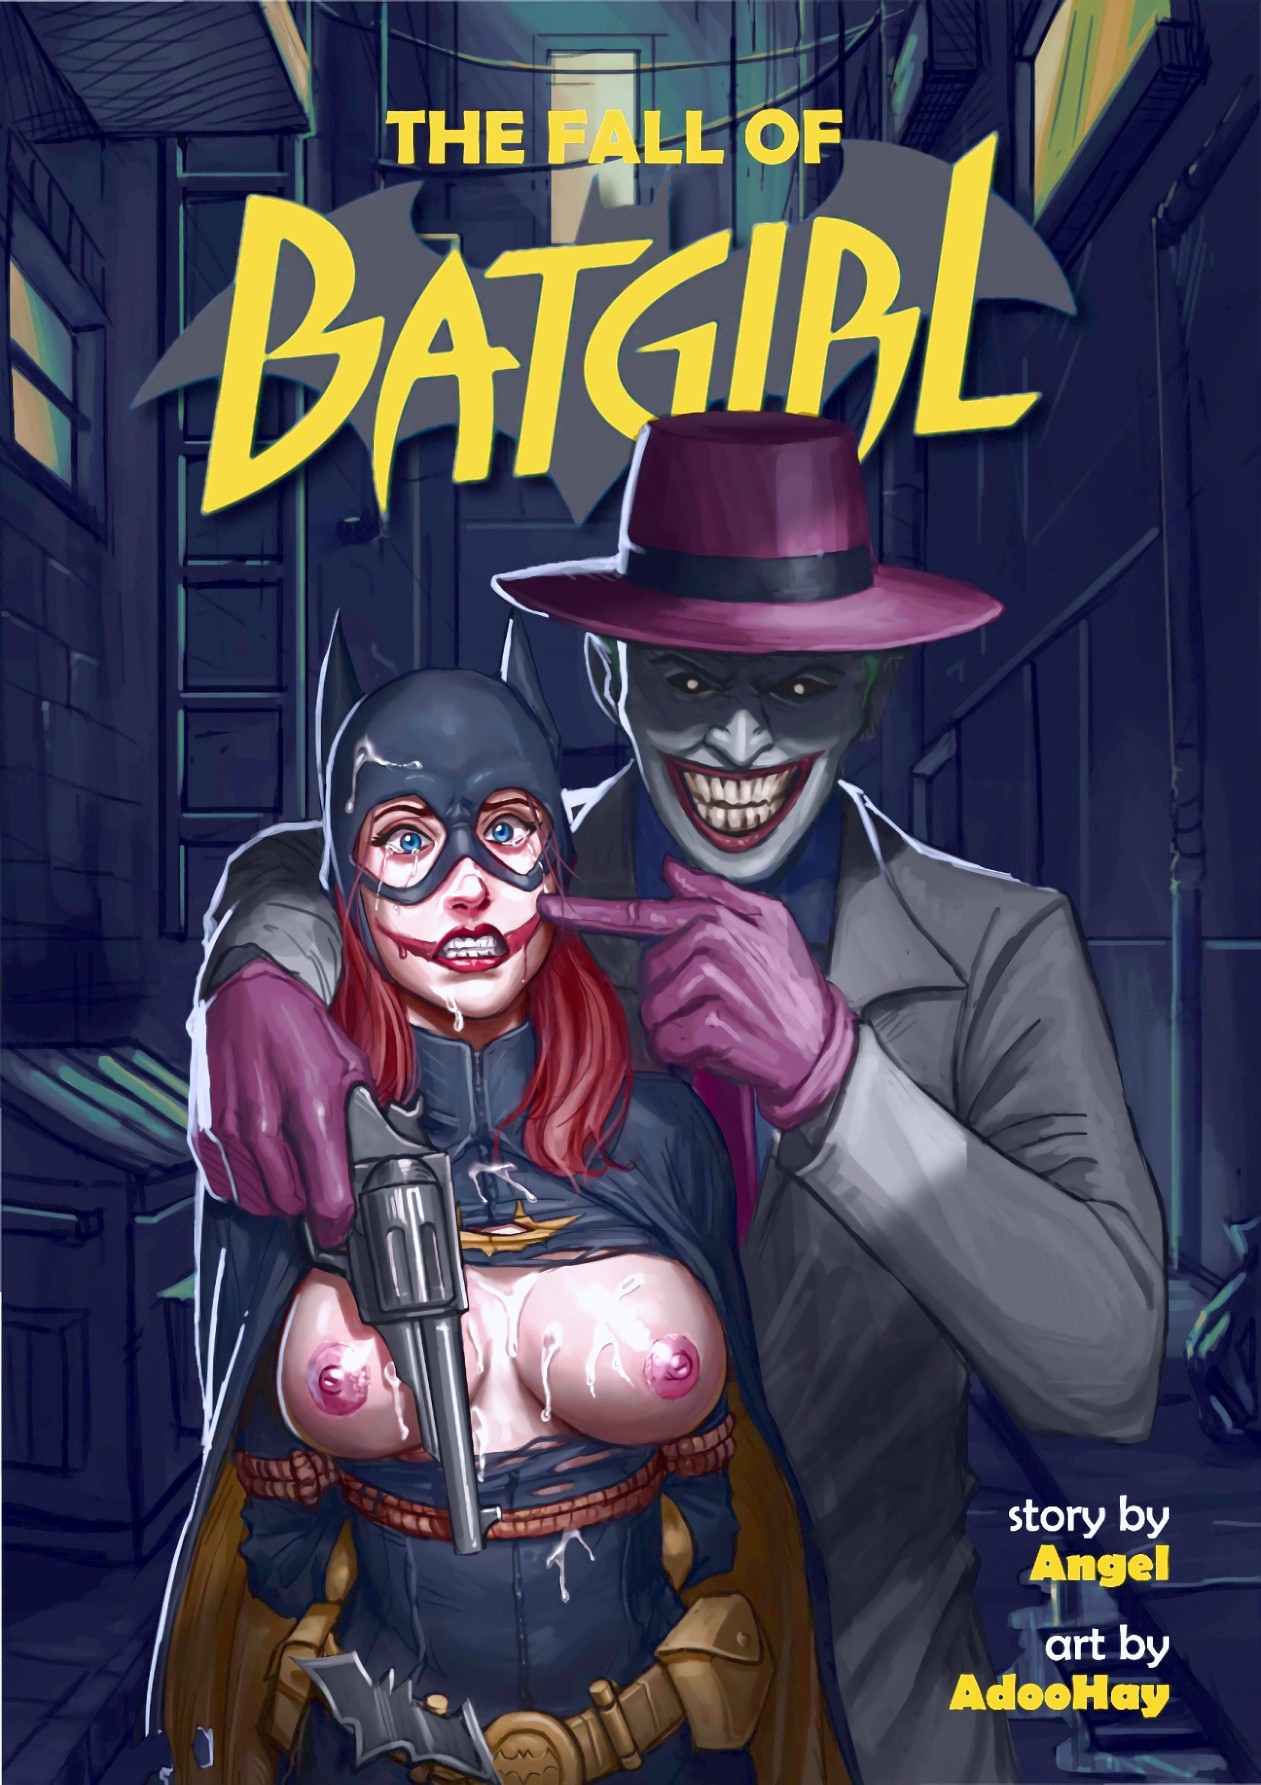 The Fall of Batgirl porn comic page 01 on category Batman